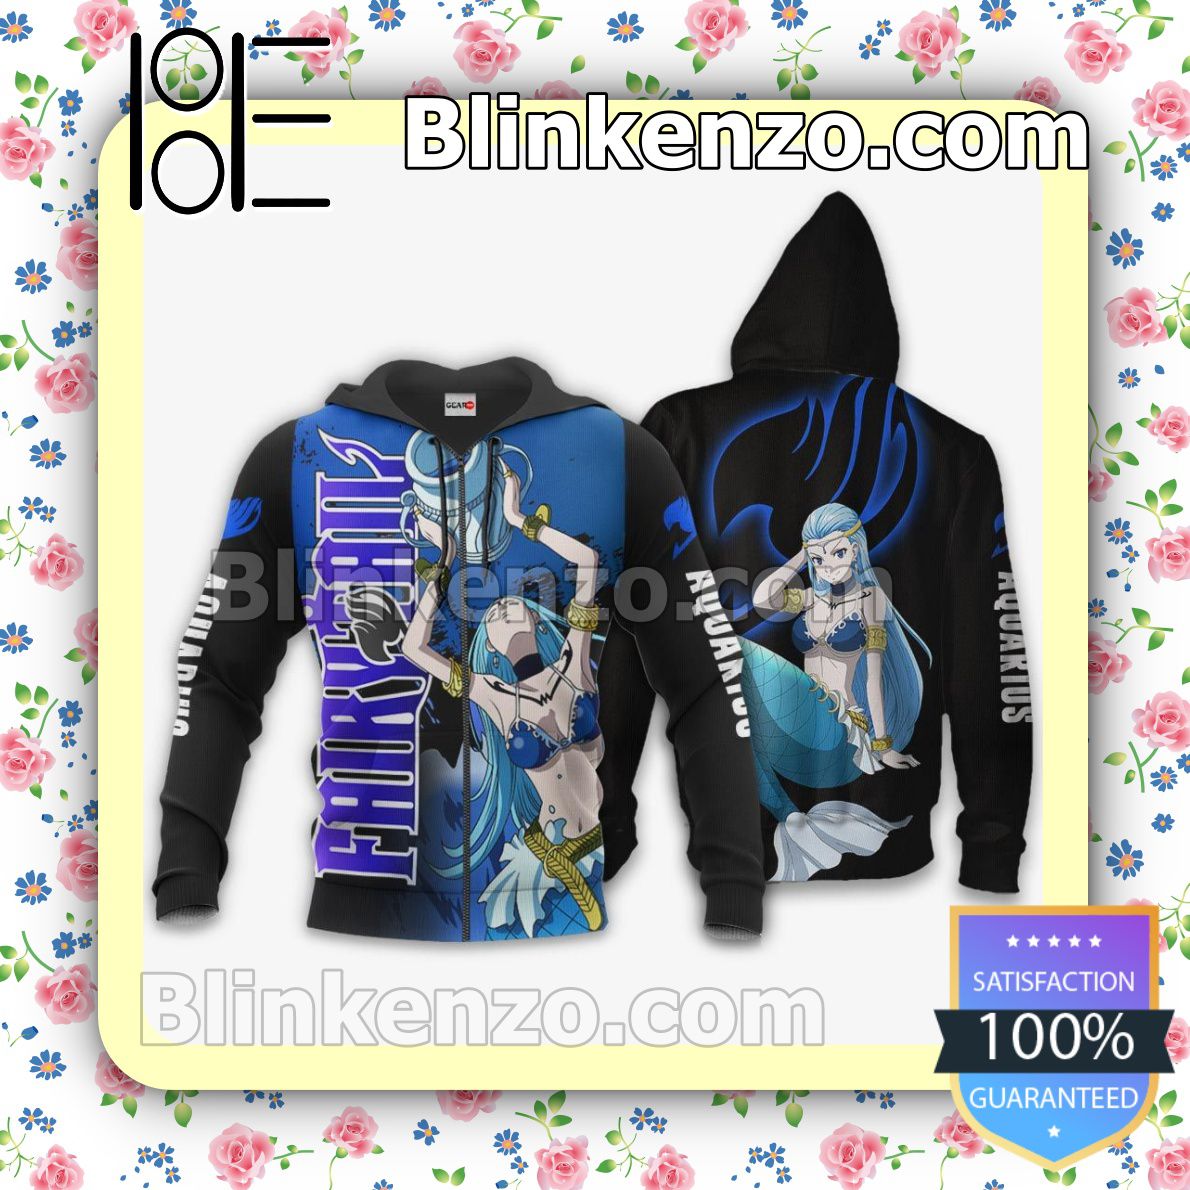 Celestial Aquarius Fairy Tail Anime Merch Stores Personalized T-shirt, Hoodie, Long Sleeve, Bomber Jacket